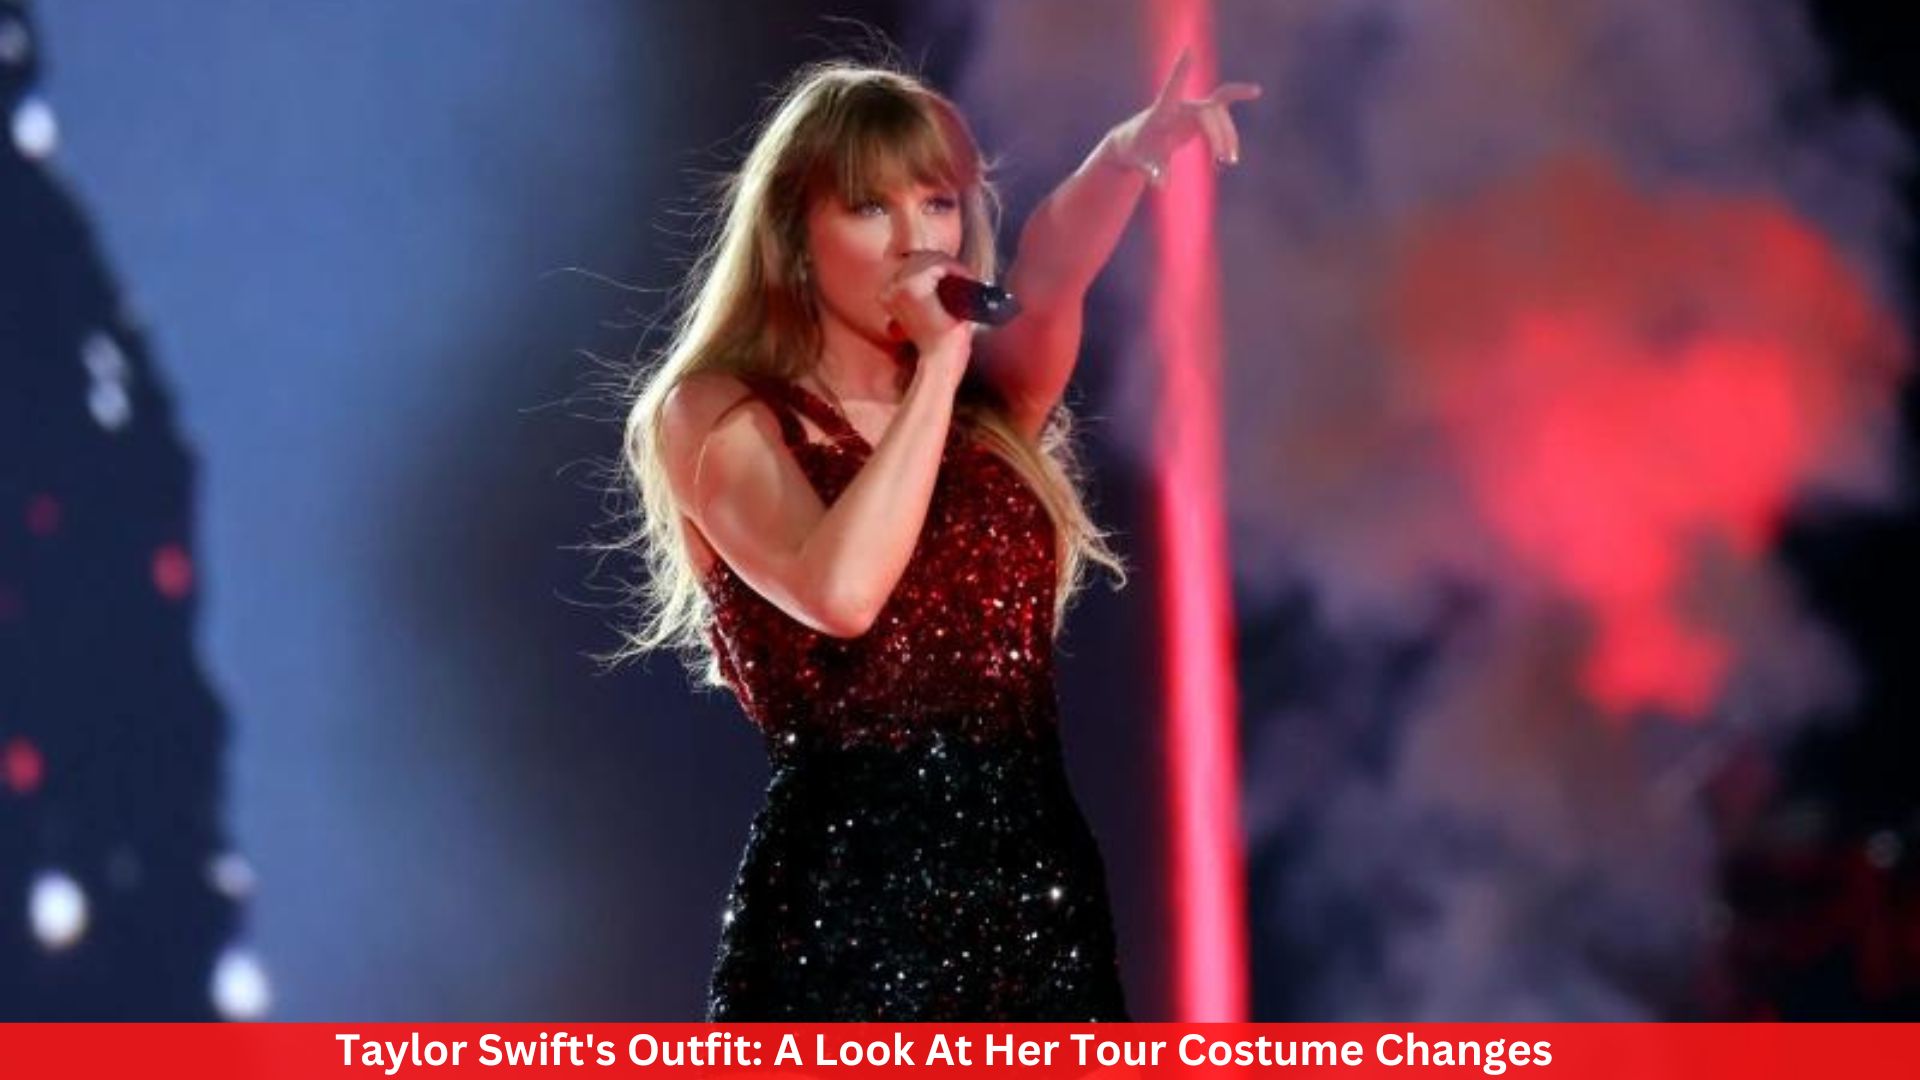 Taylor Swift's Outfit: A Look At Her Tour Costume Changes